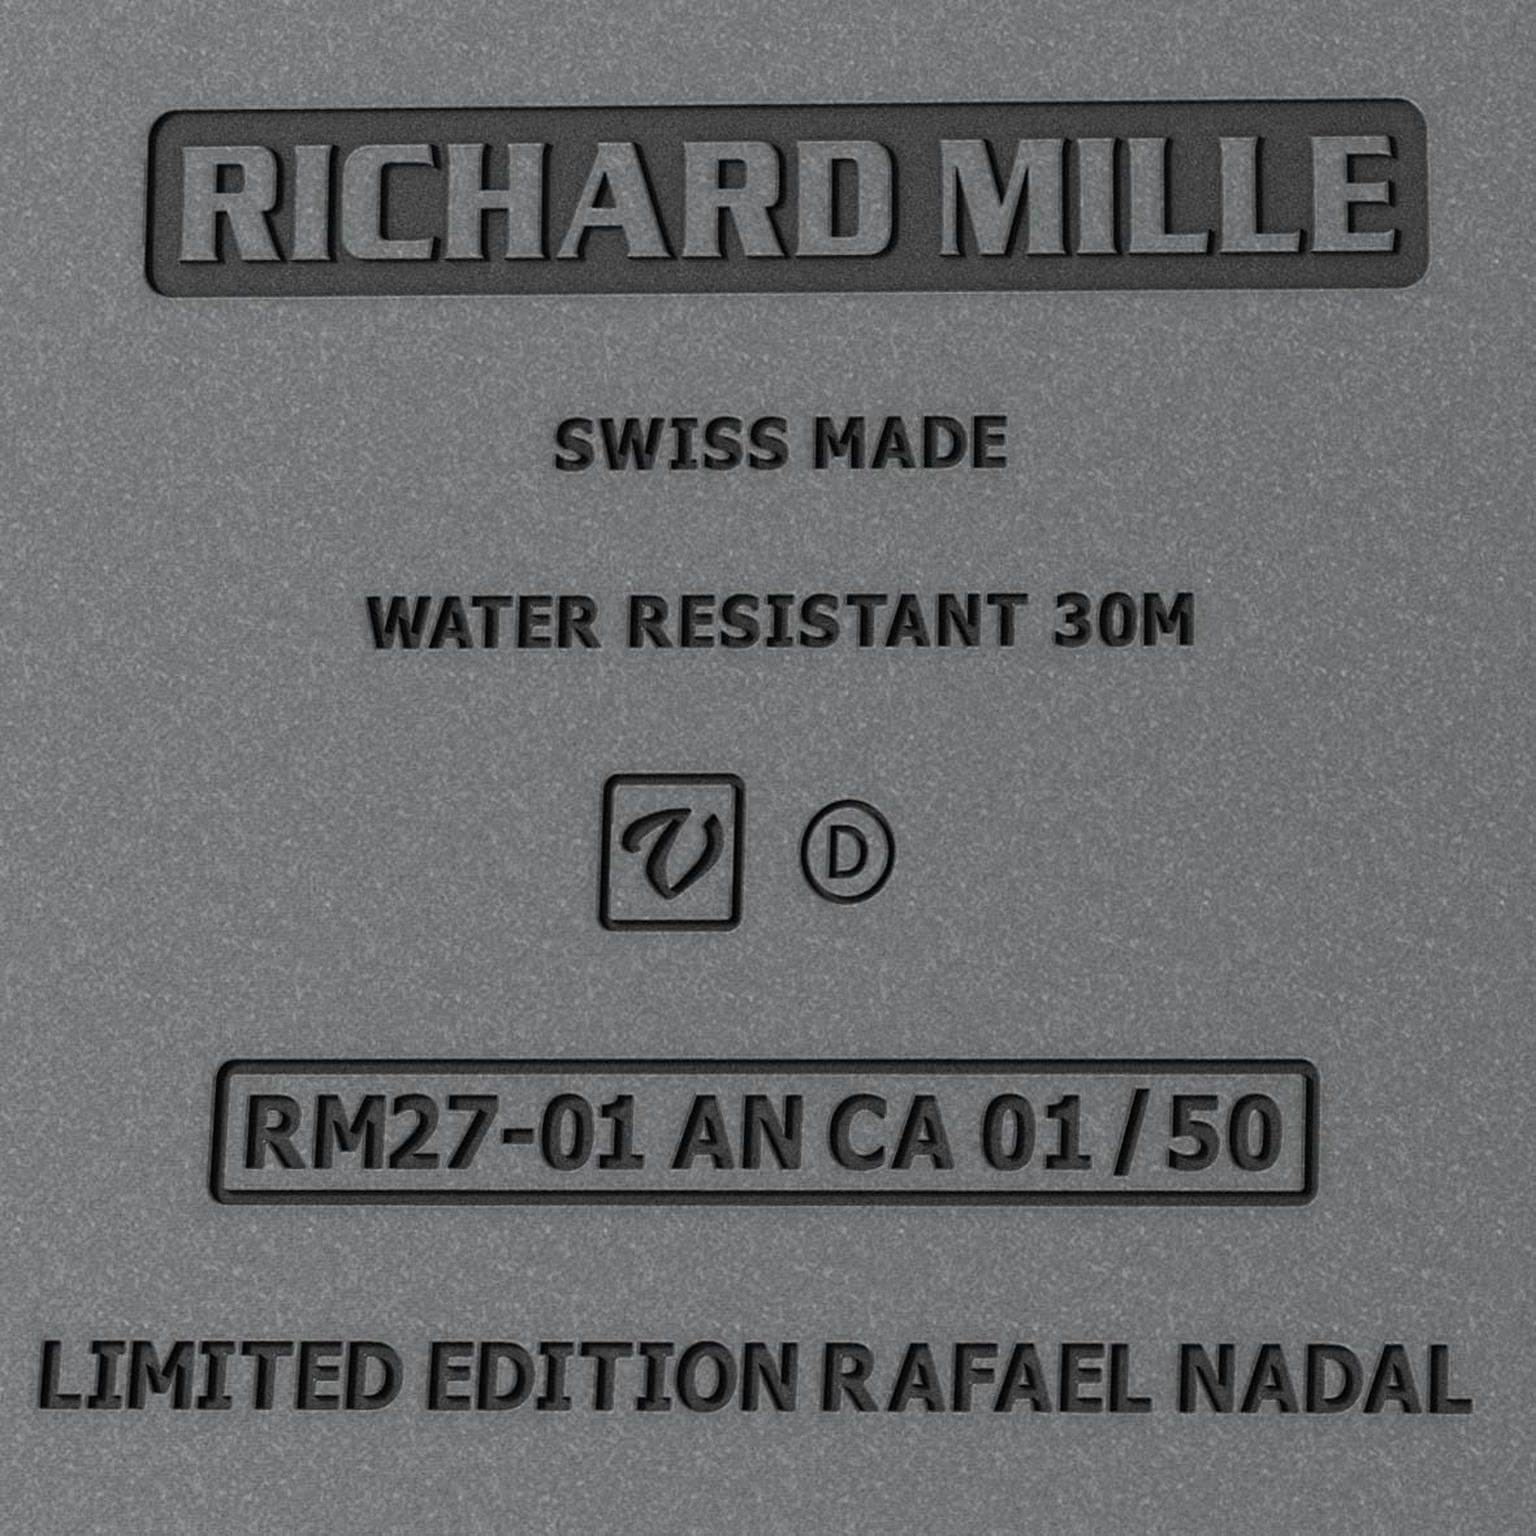 The reverse of the Richard Mille RM 27-01, marked a limited-edition Rafael Nadal watch.